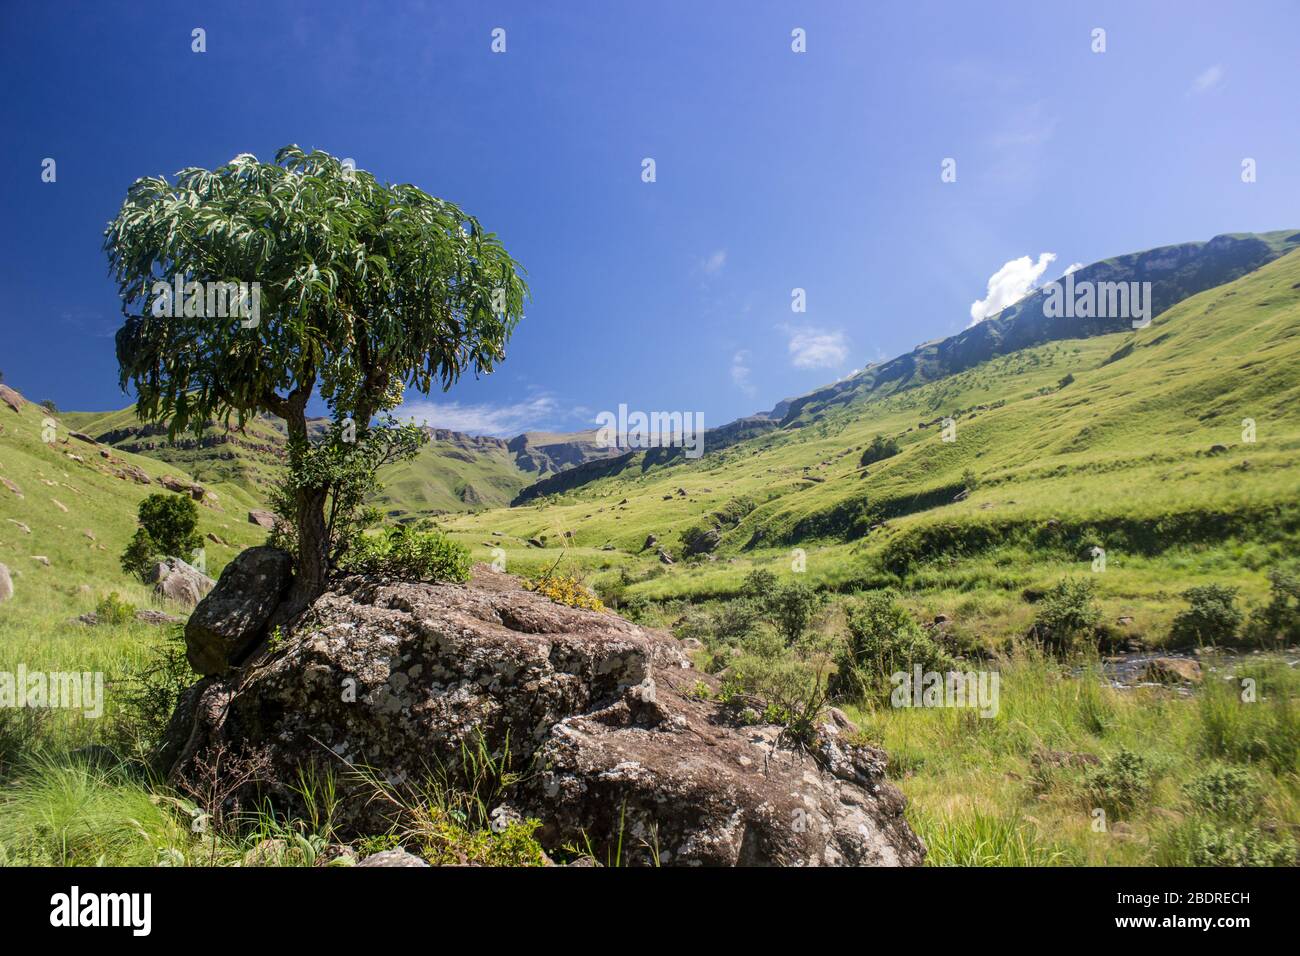 View over the Afroalpine grassland with a Mountain Cabbage Tree (Cussonia Paniculata) growing next to a Basalt Boulder in the forefront, Stock Photo